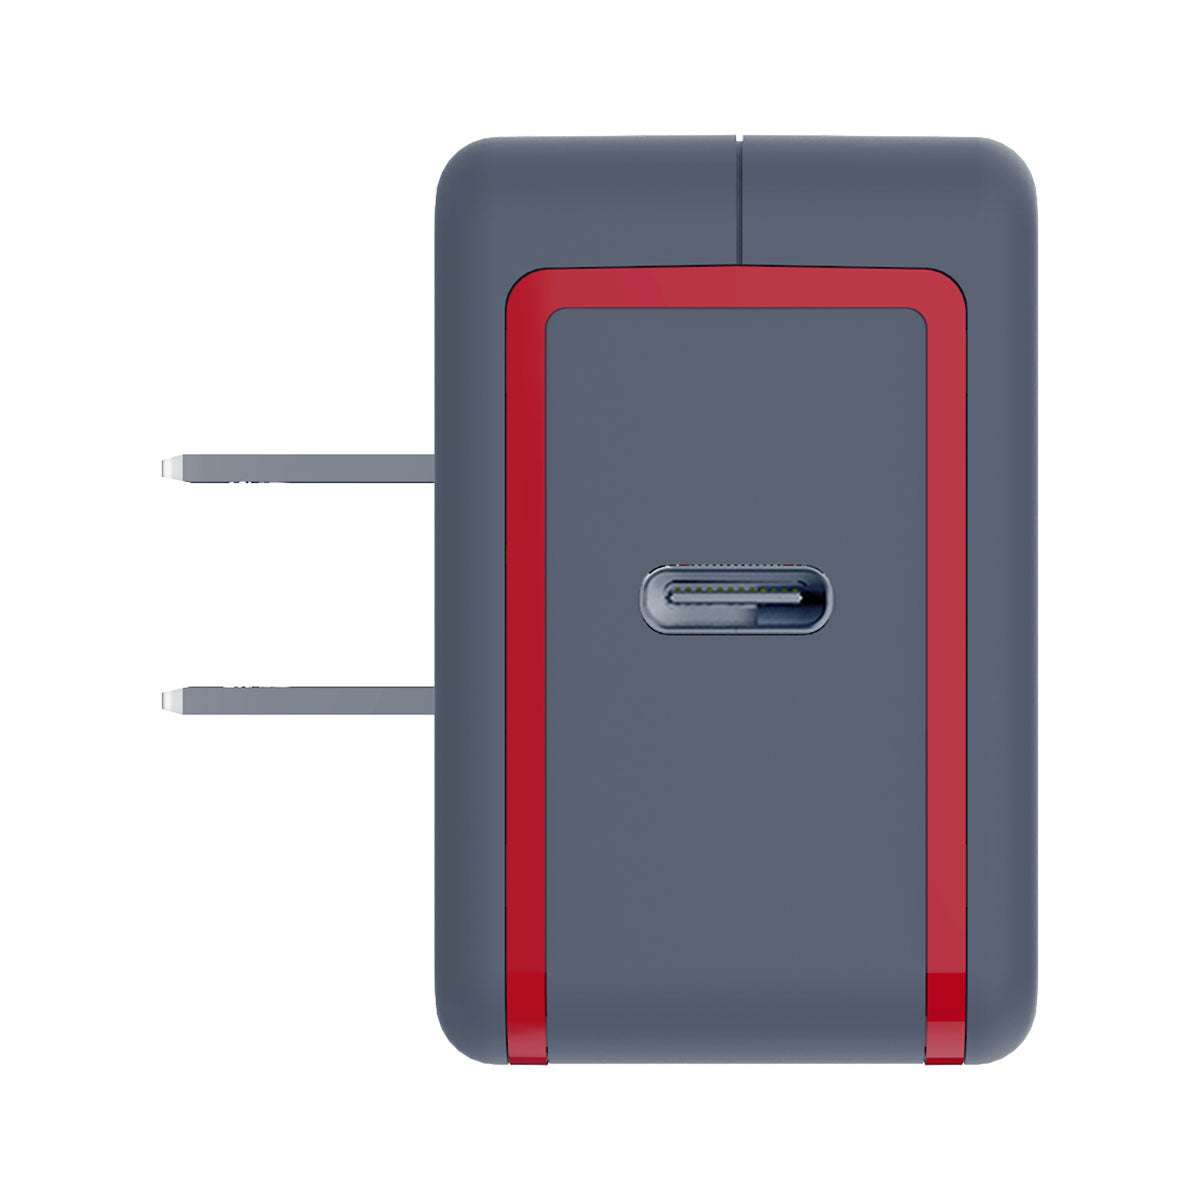 Puregear 24W Universal USB PD Wall Charger - Gray/Red